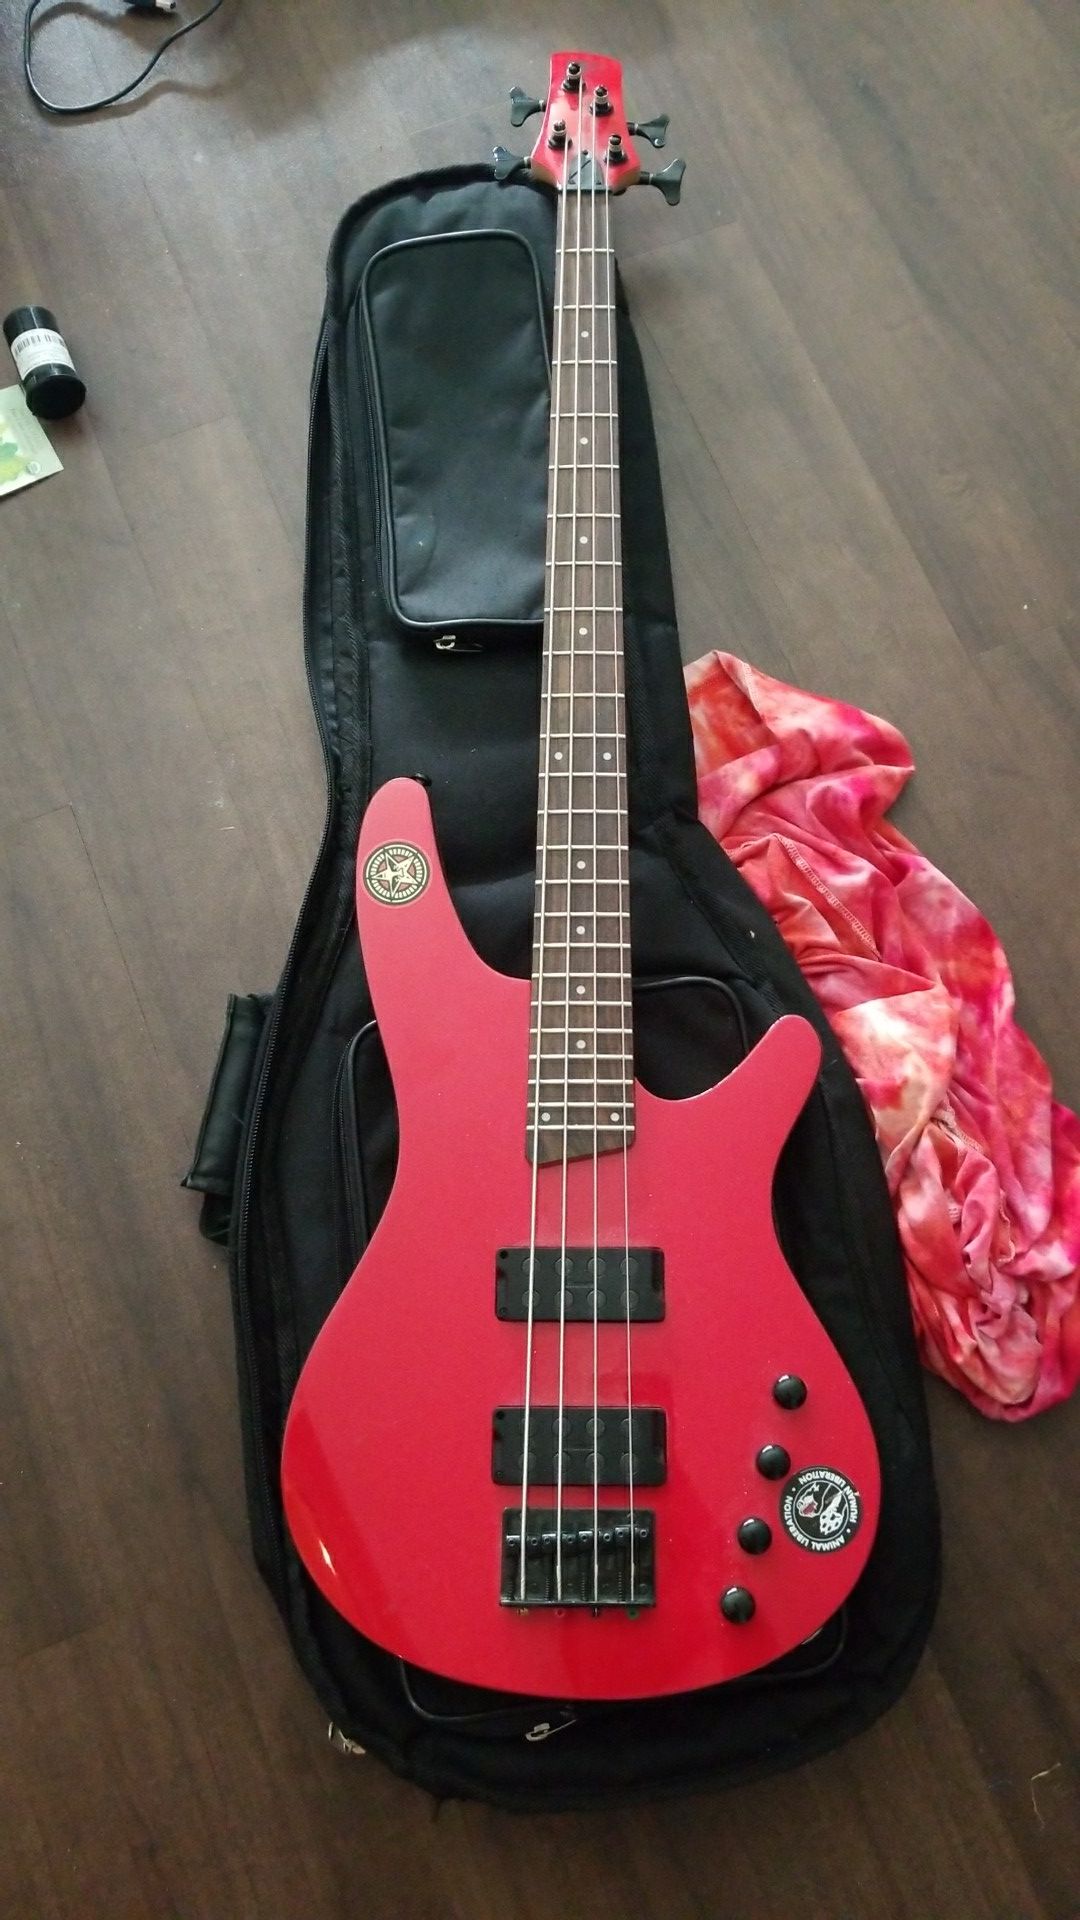 MUST SELL Ibanez Soundgear Bass